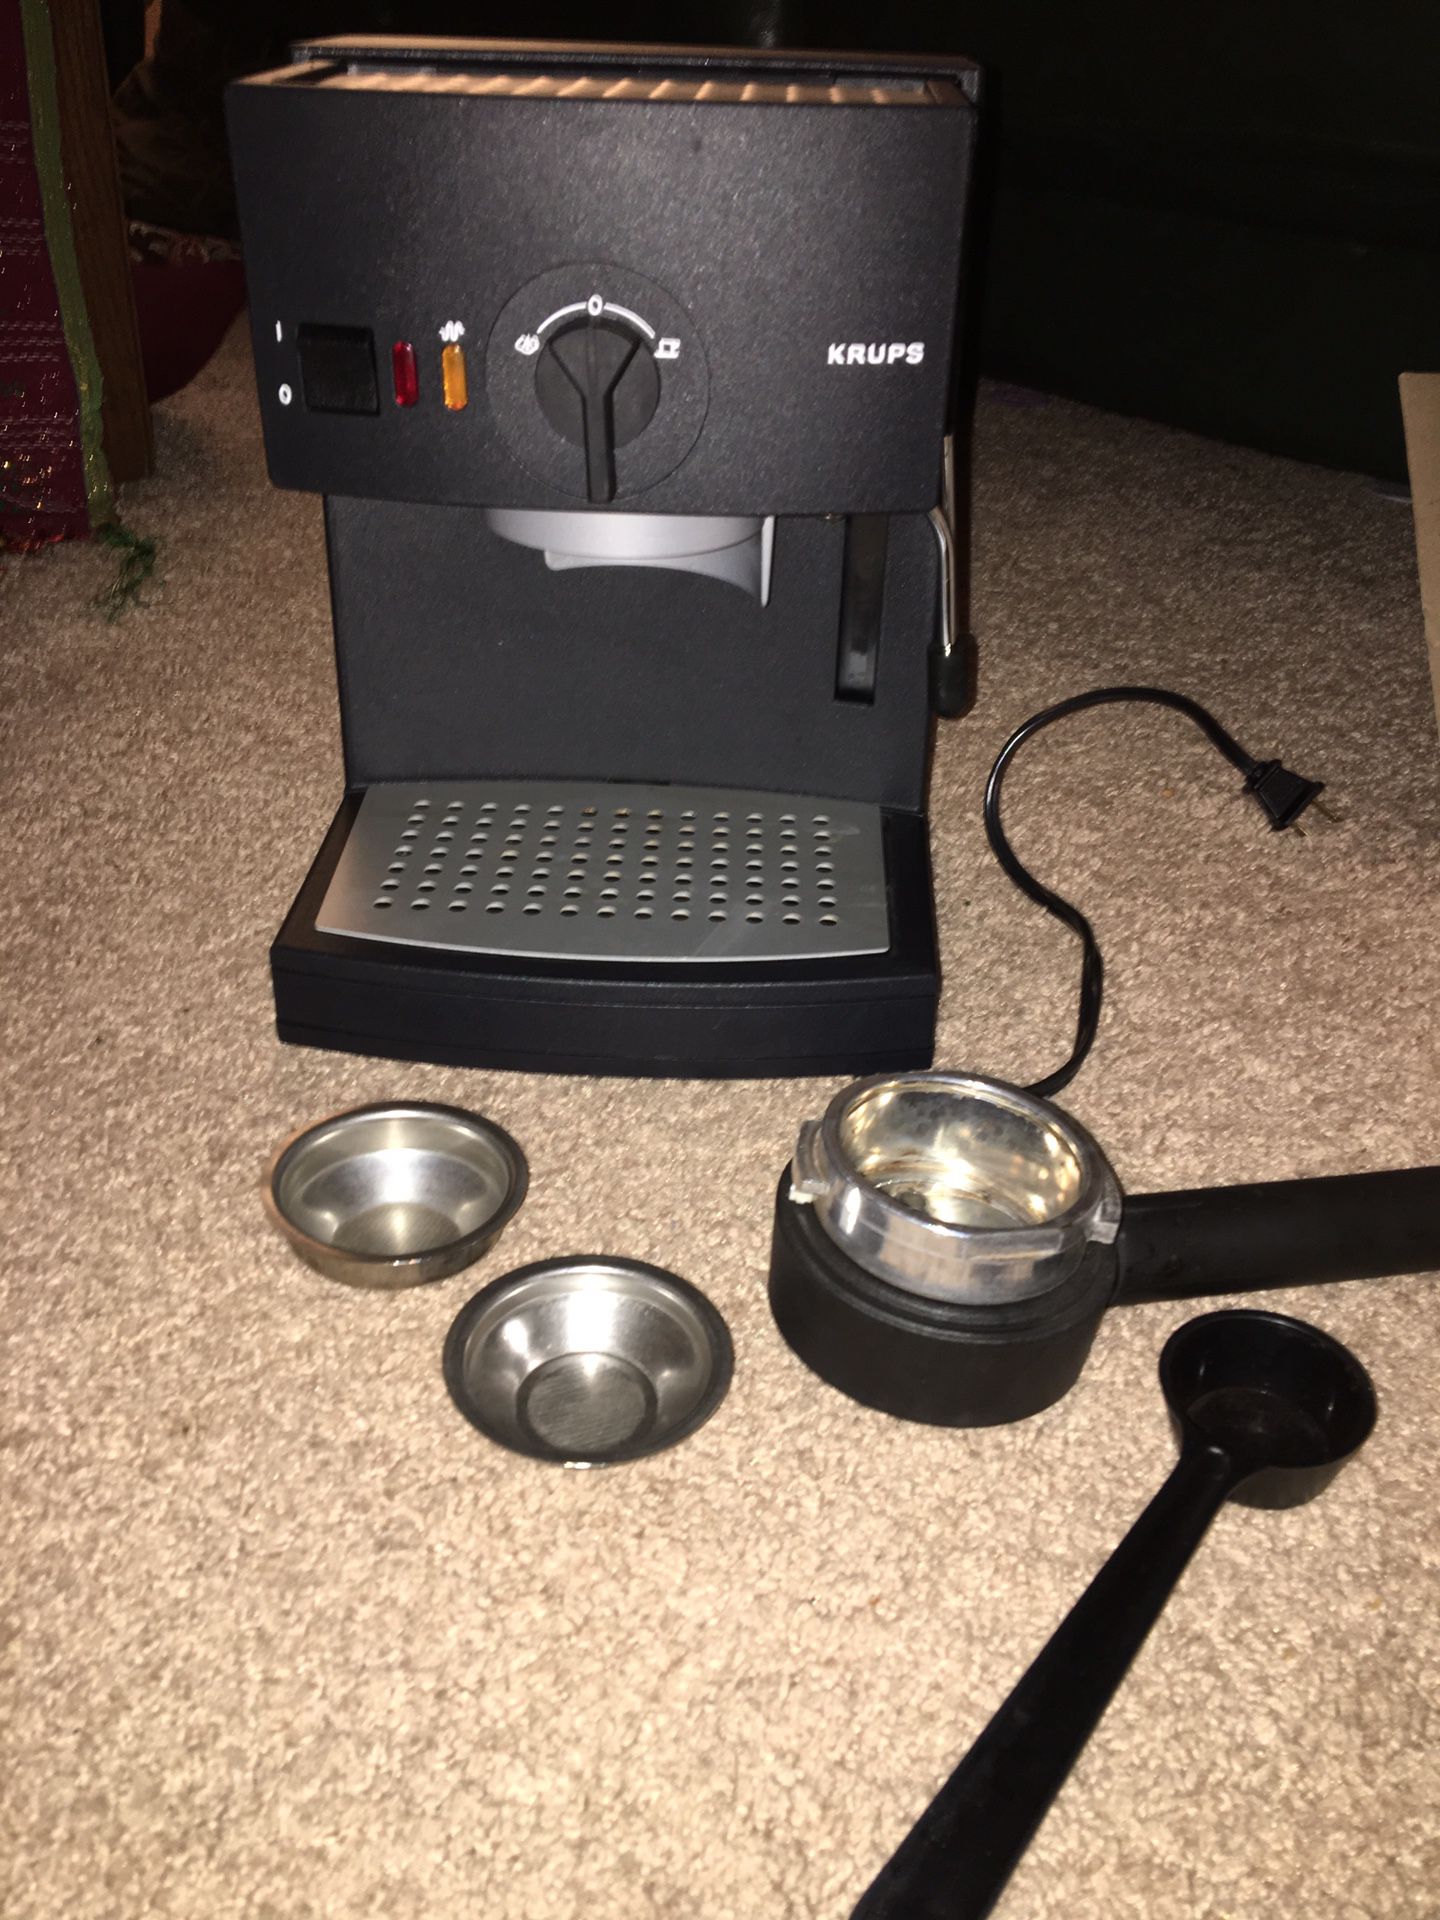 Krups Bravo Plus 872-42 4 Cup Household Espresso Maker Coffee Machine for  Sale in Des Moines, IA - OfferUp